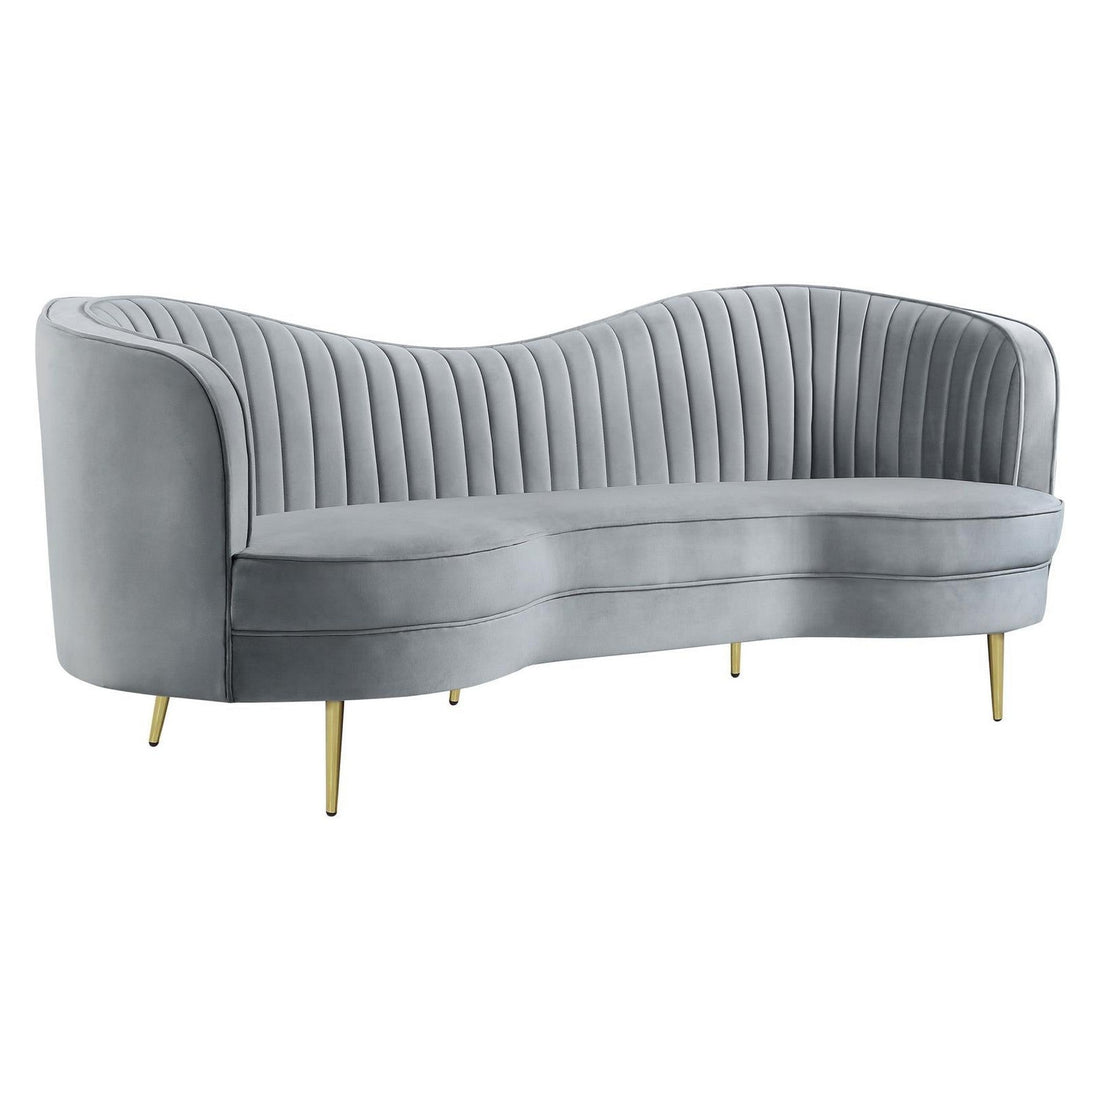 Sophia Upholstered Sofa with Camel Back Grey and Gold 506864